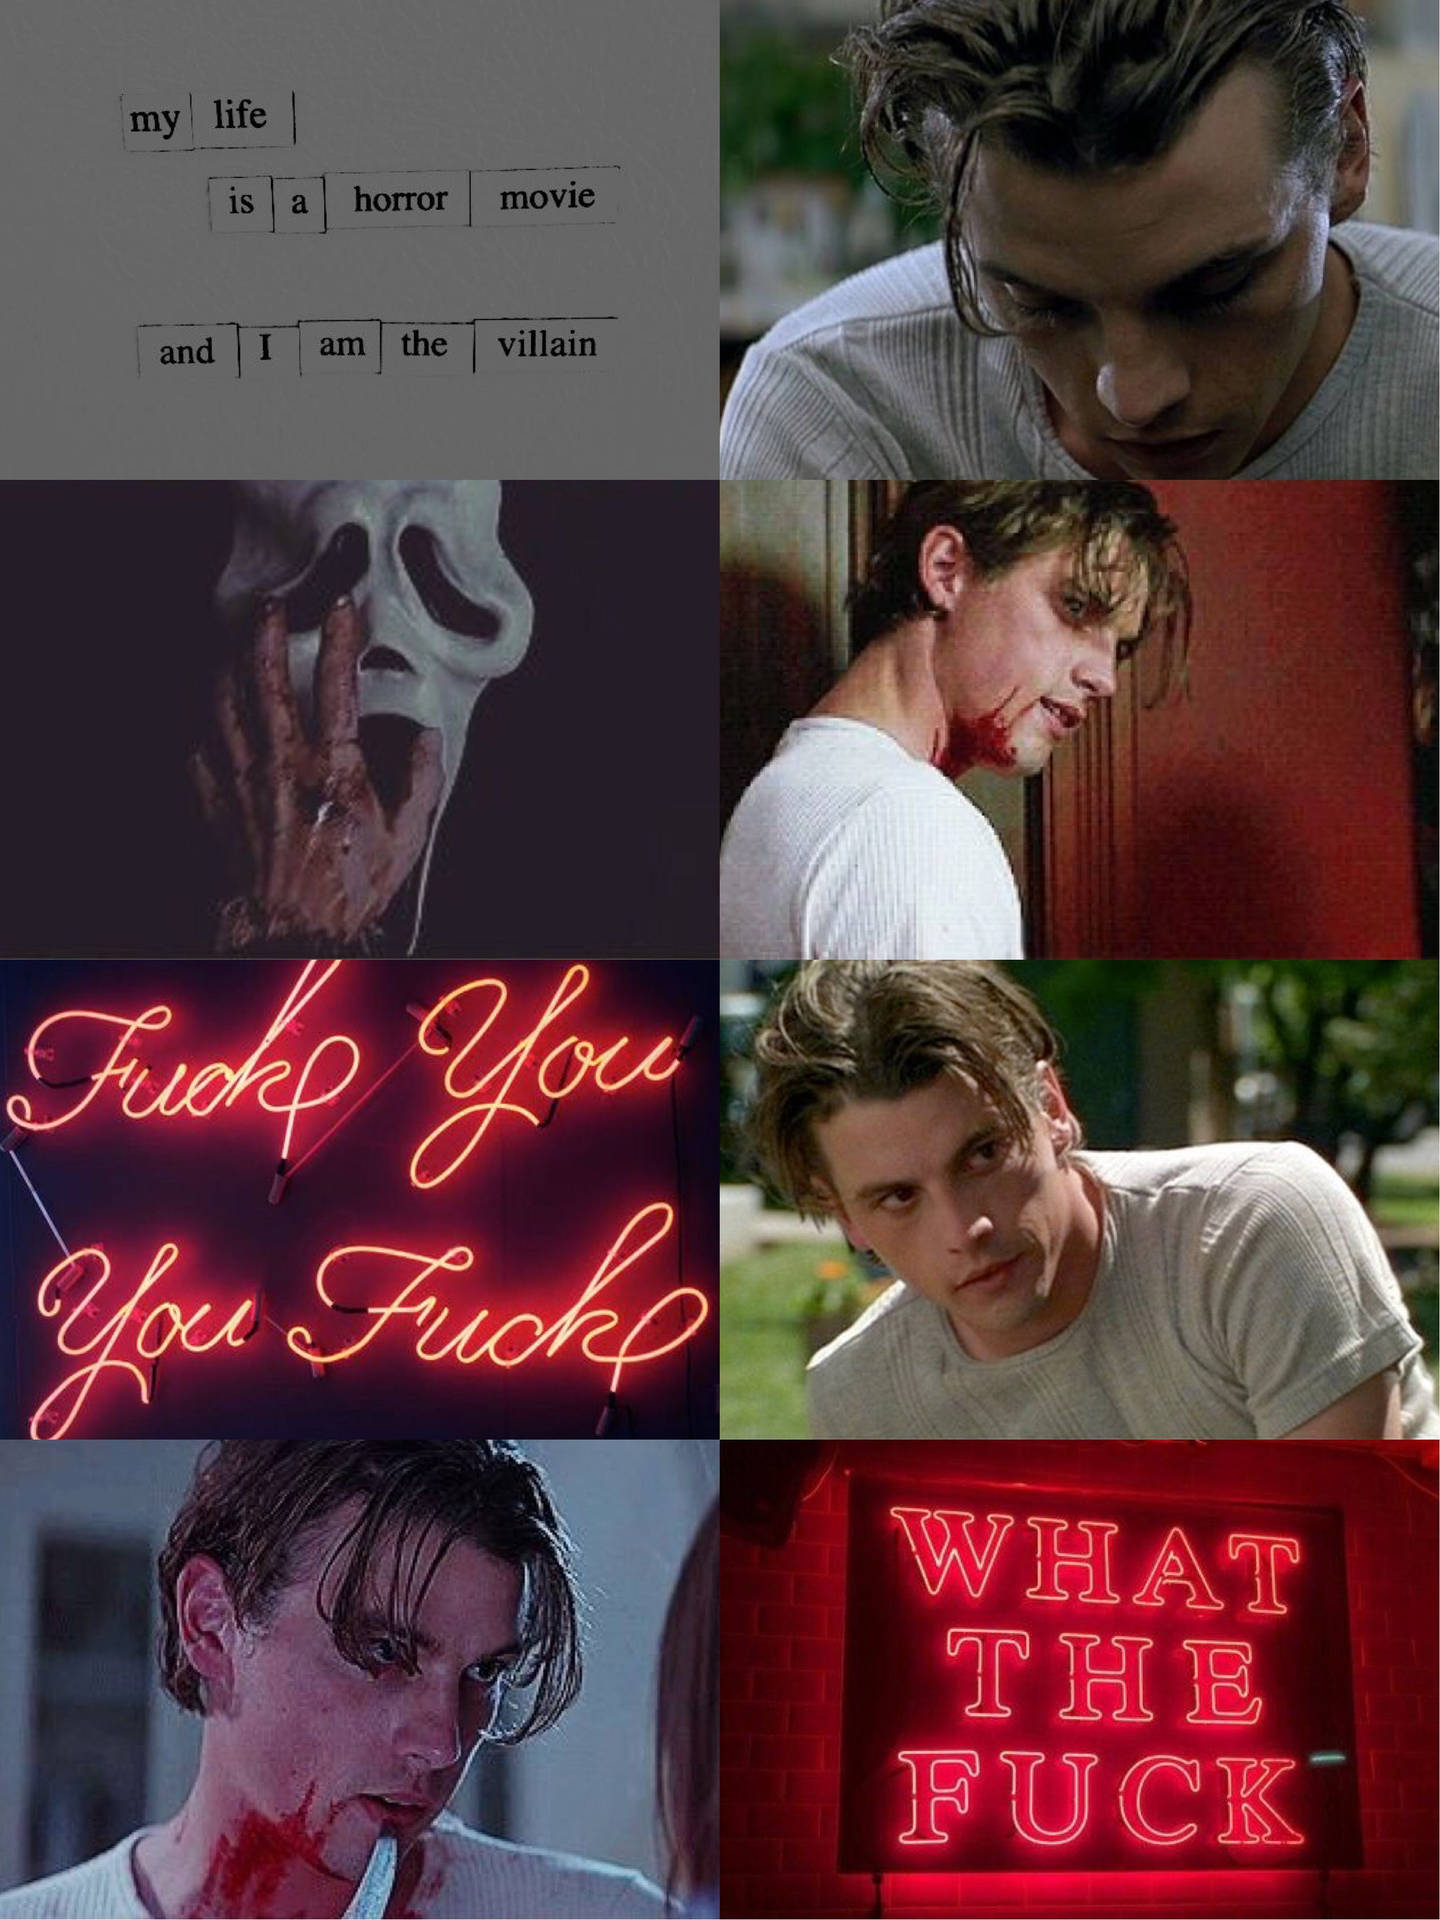 Aesthetic Image Of Billy Loomis Background